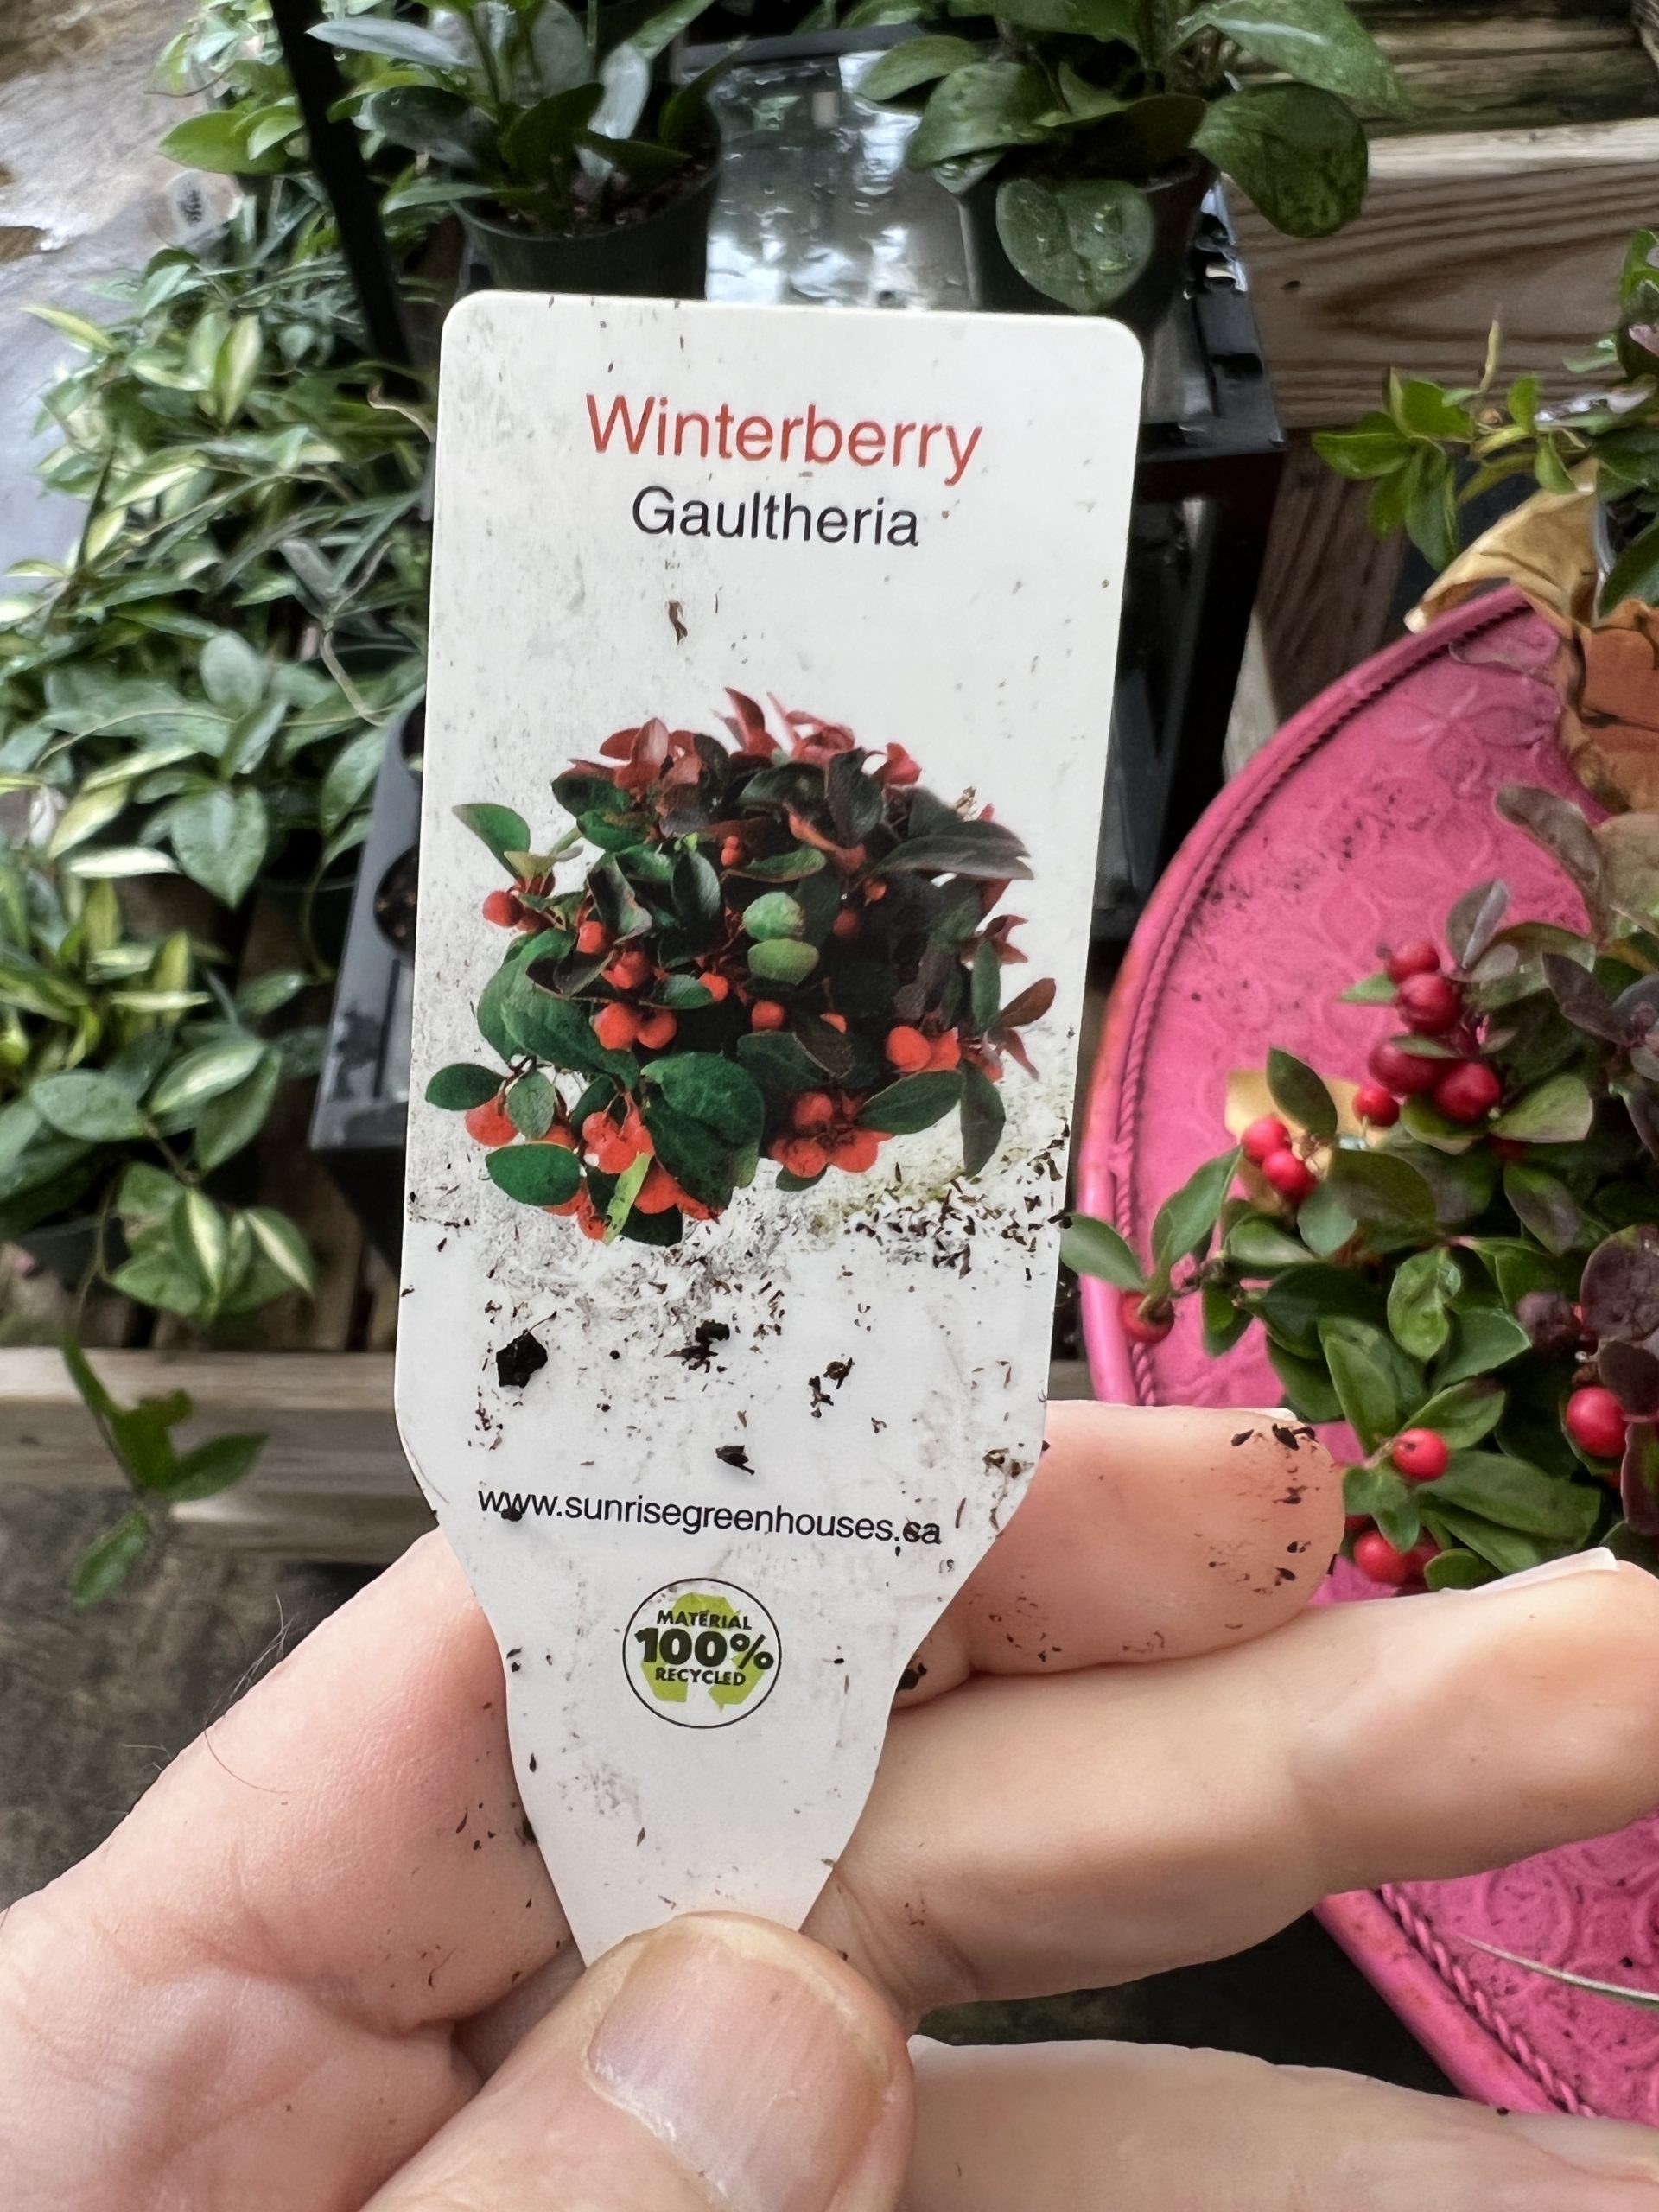 Winterberry, or Gaultheria procumbens, is now being sold in 4- to 6-inch pots as holiday plants. If kept cold over the winter, it can be planted in the wooded shade garden in the spring.